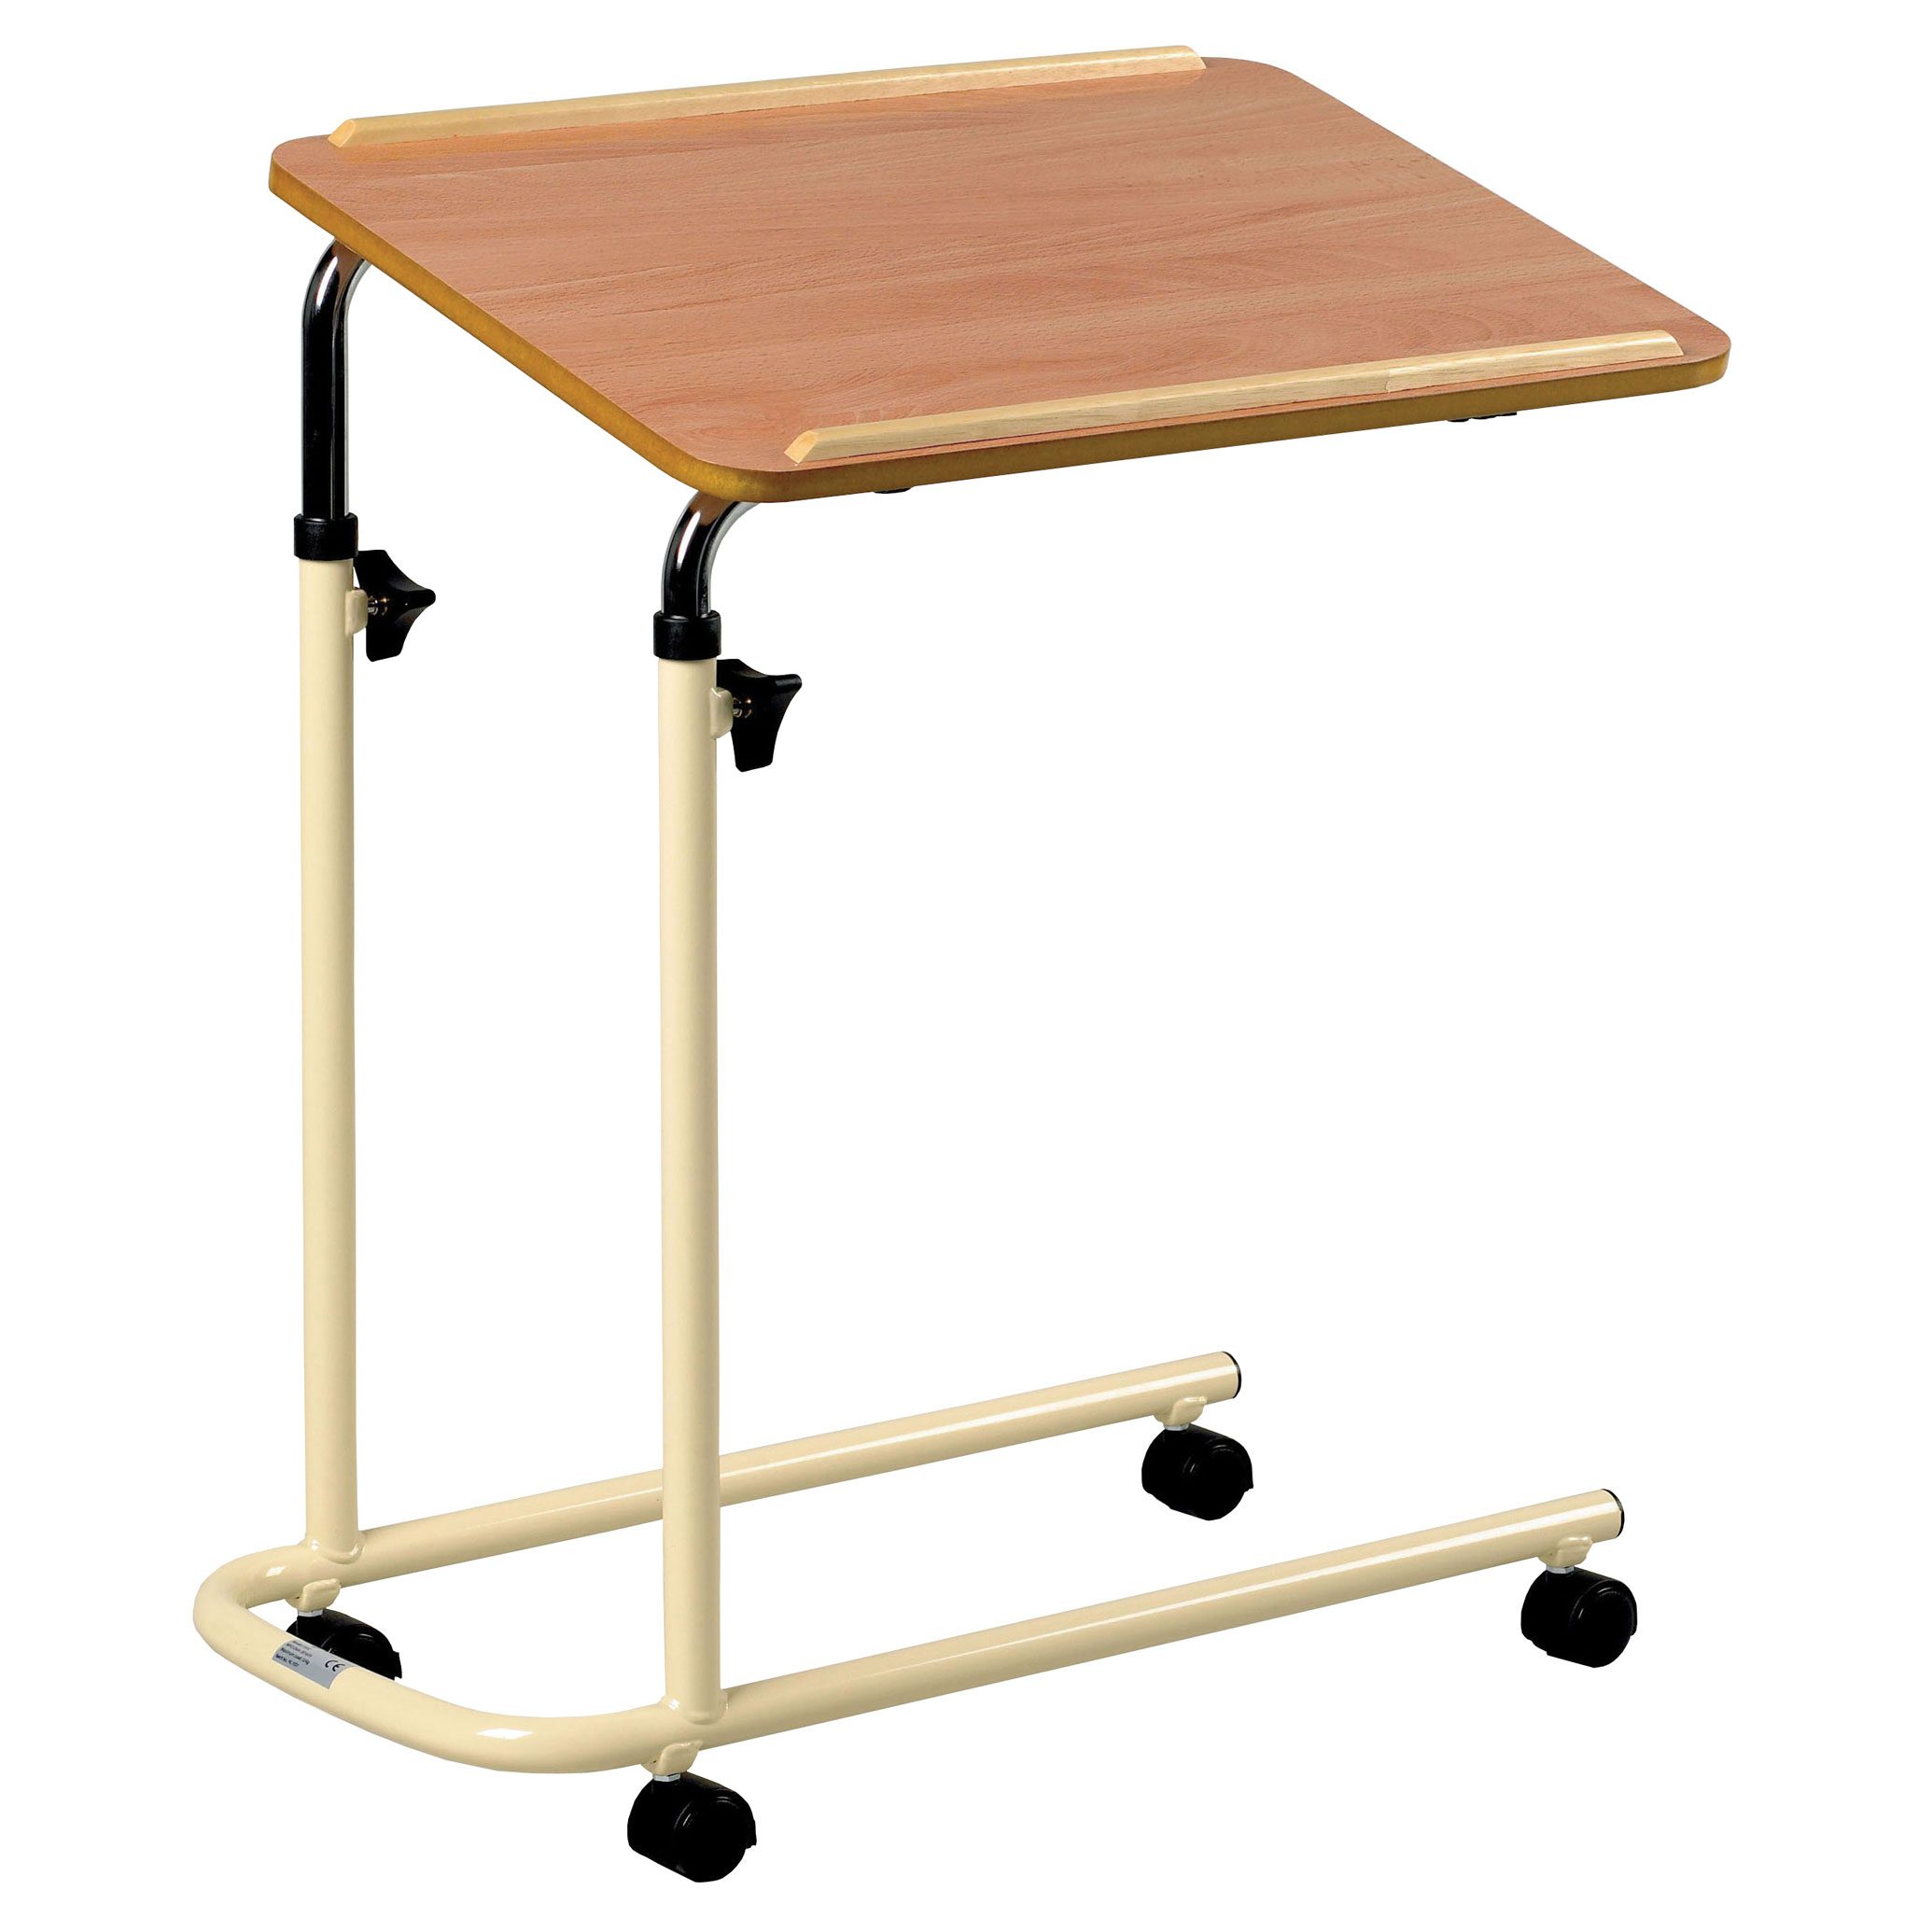 Marlin Overbed Table with Castors